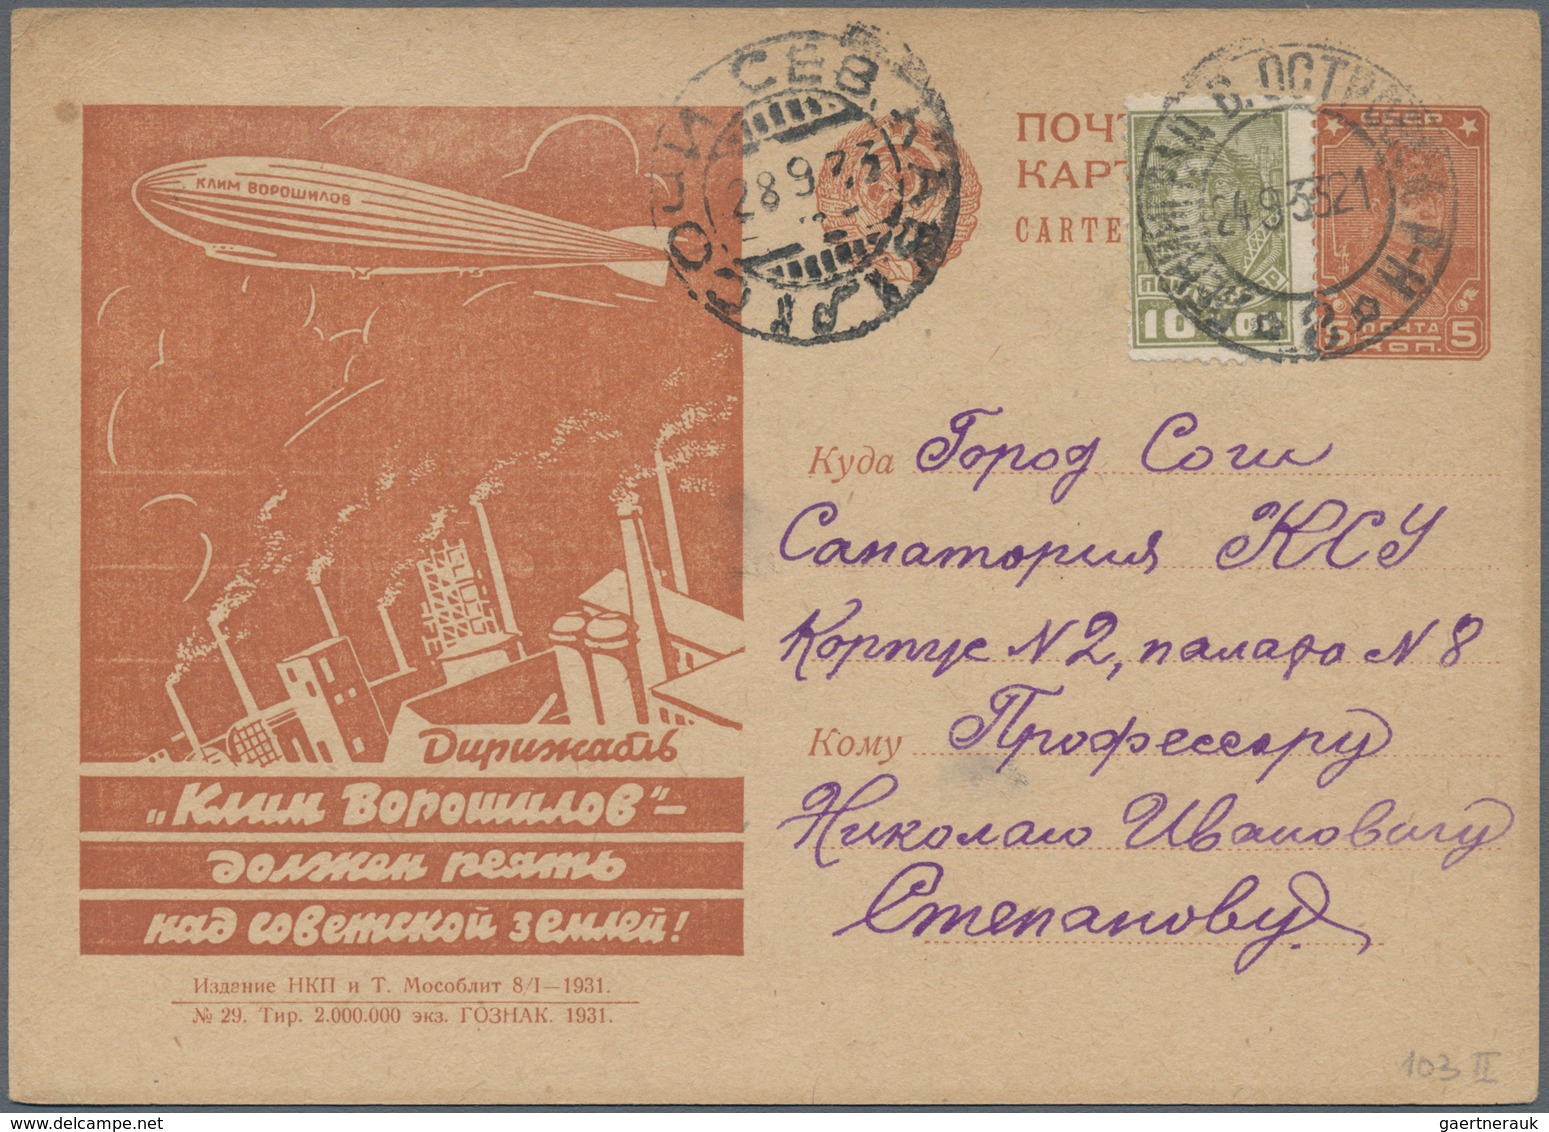 Sowjetunion - Ganzsachen: 1930/32, 7 Different Used Picture Postcards With Motive Zeppelin, One Card - Unclassified